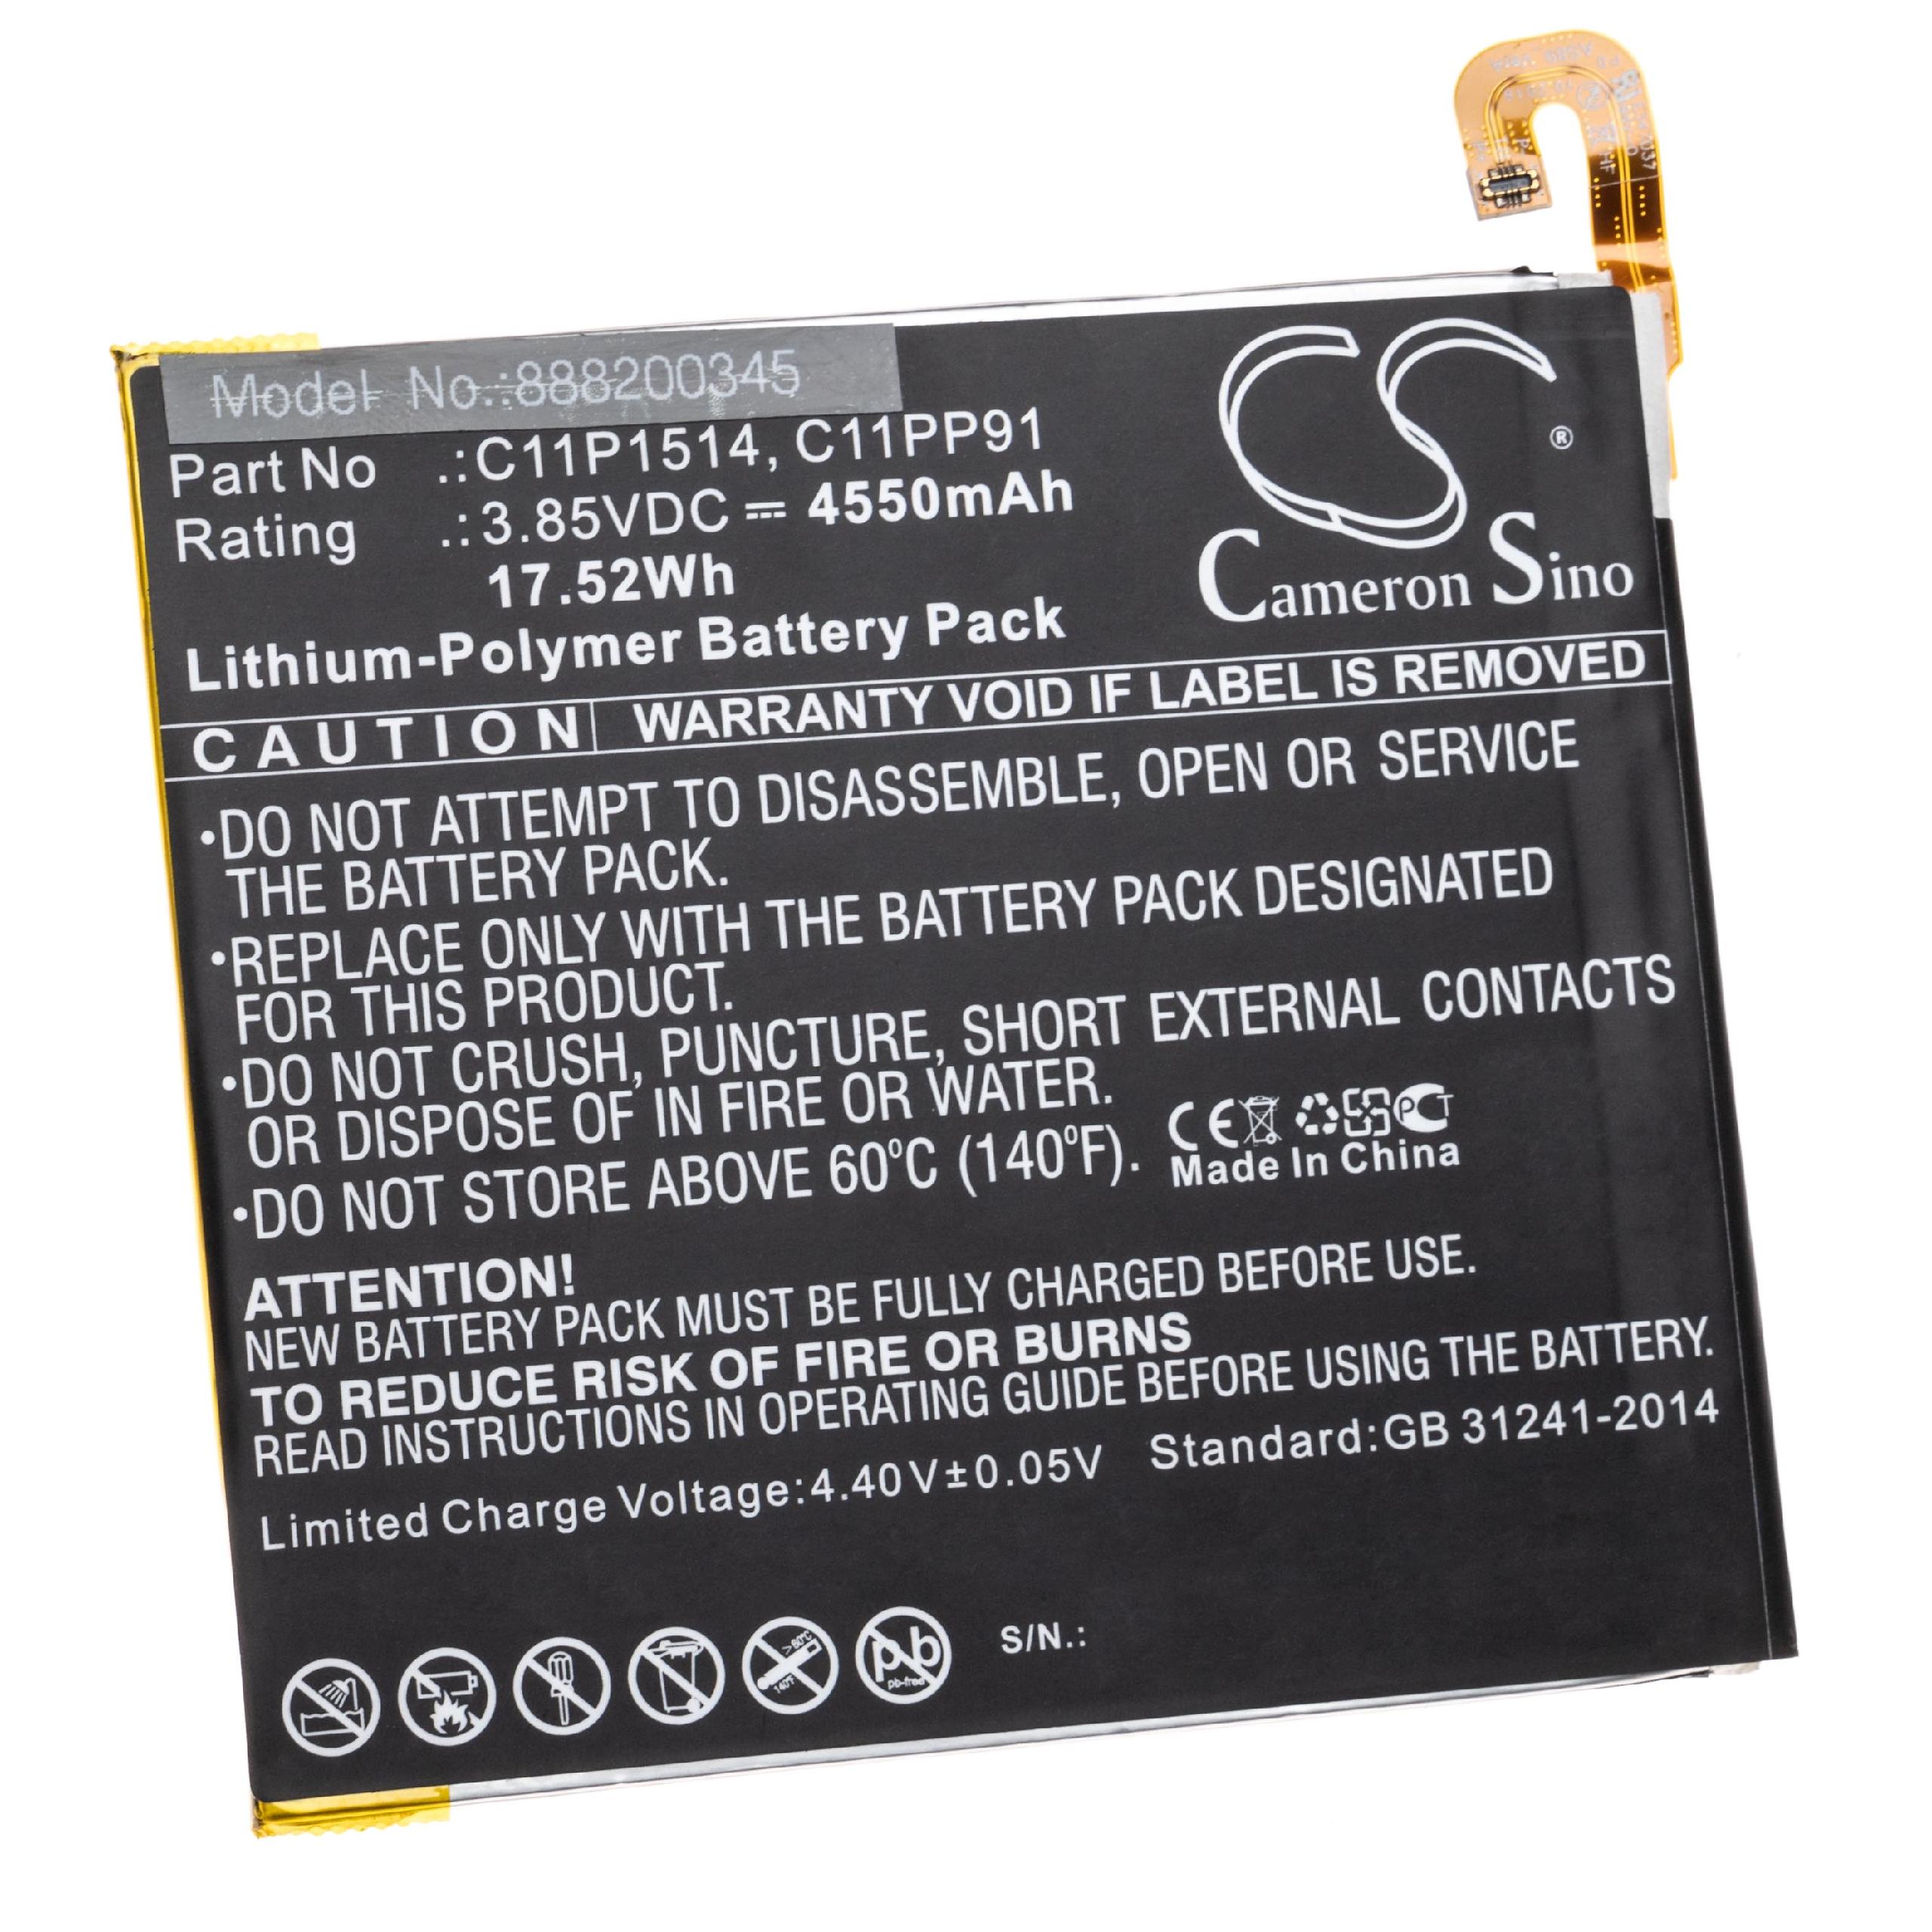 Tablet Battery Replacement for Asus C11P1514, 0B200-01970000, M619, C11PP91 - 4550mAh 3.85V Li-polymer